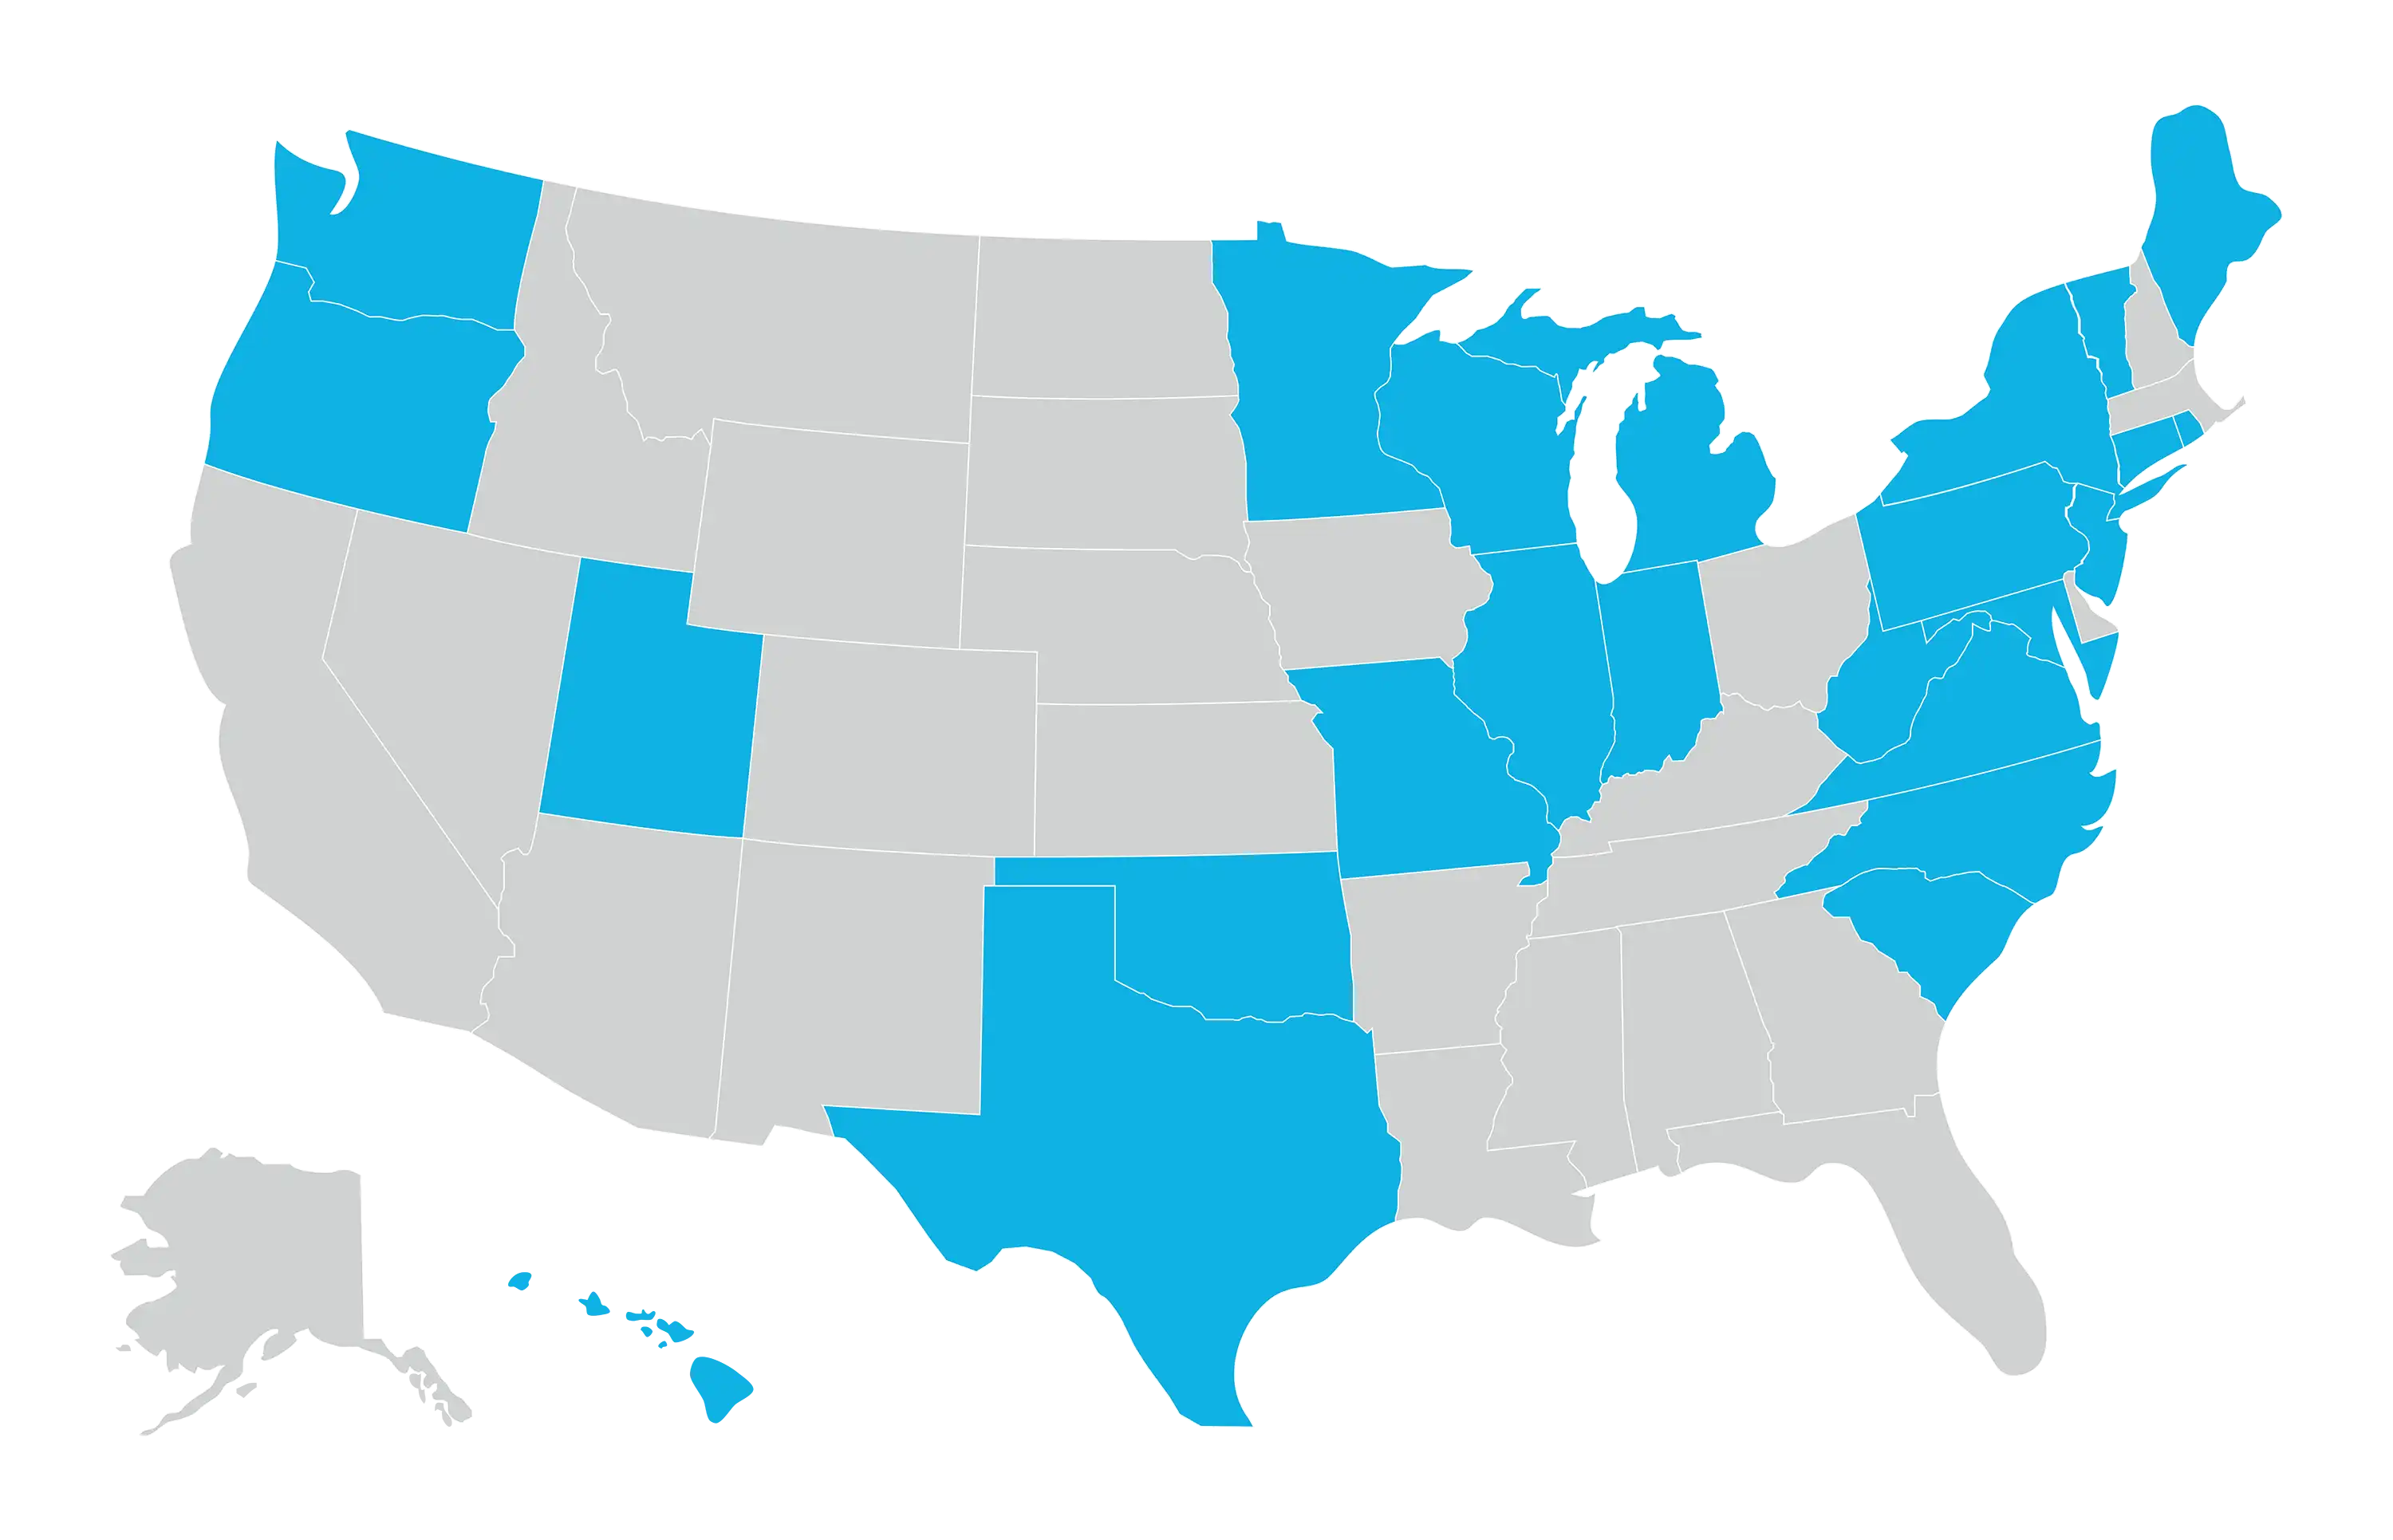 Map of the United States of America with recycling mail-in/drop off states highlighted in blue